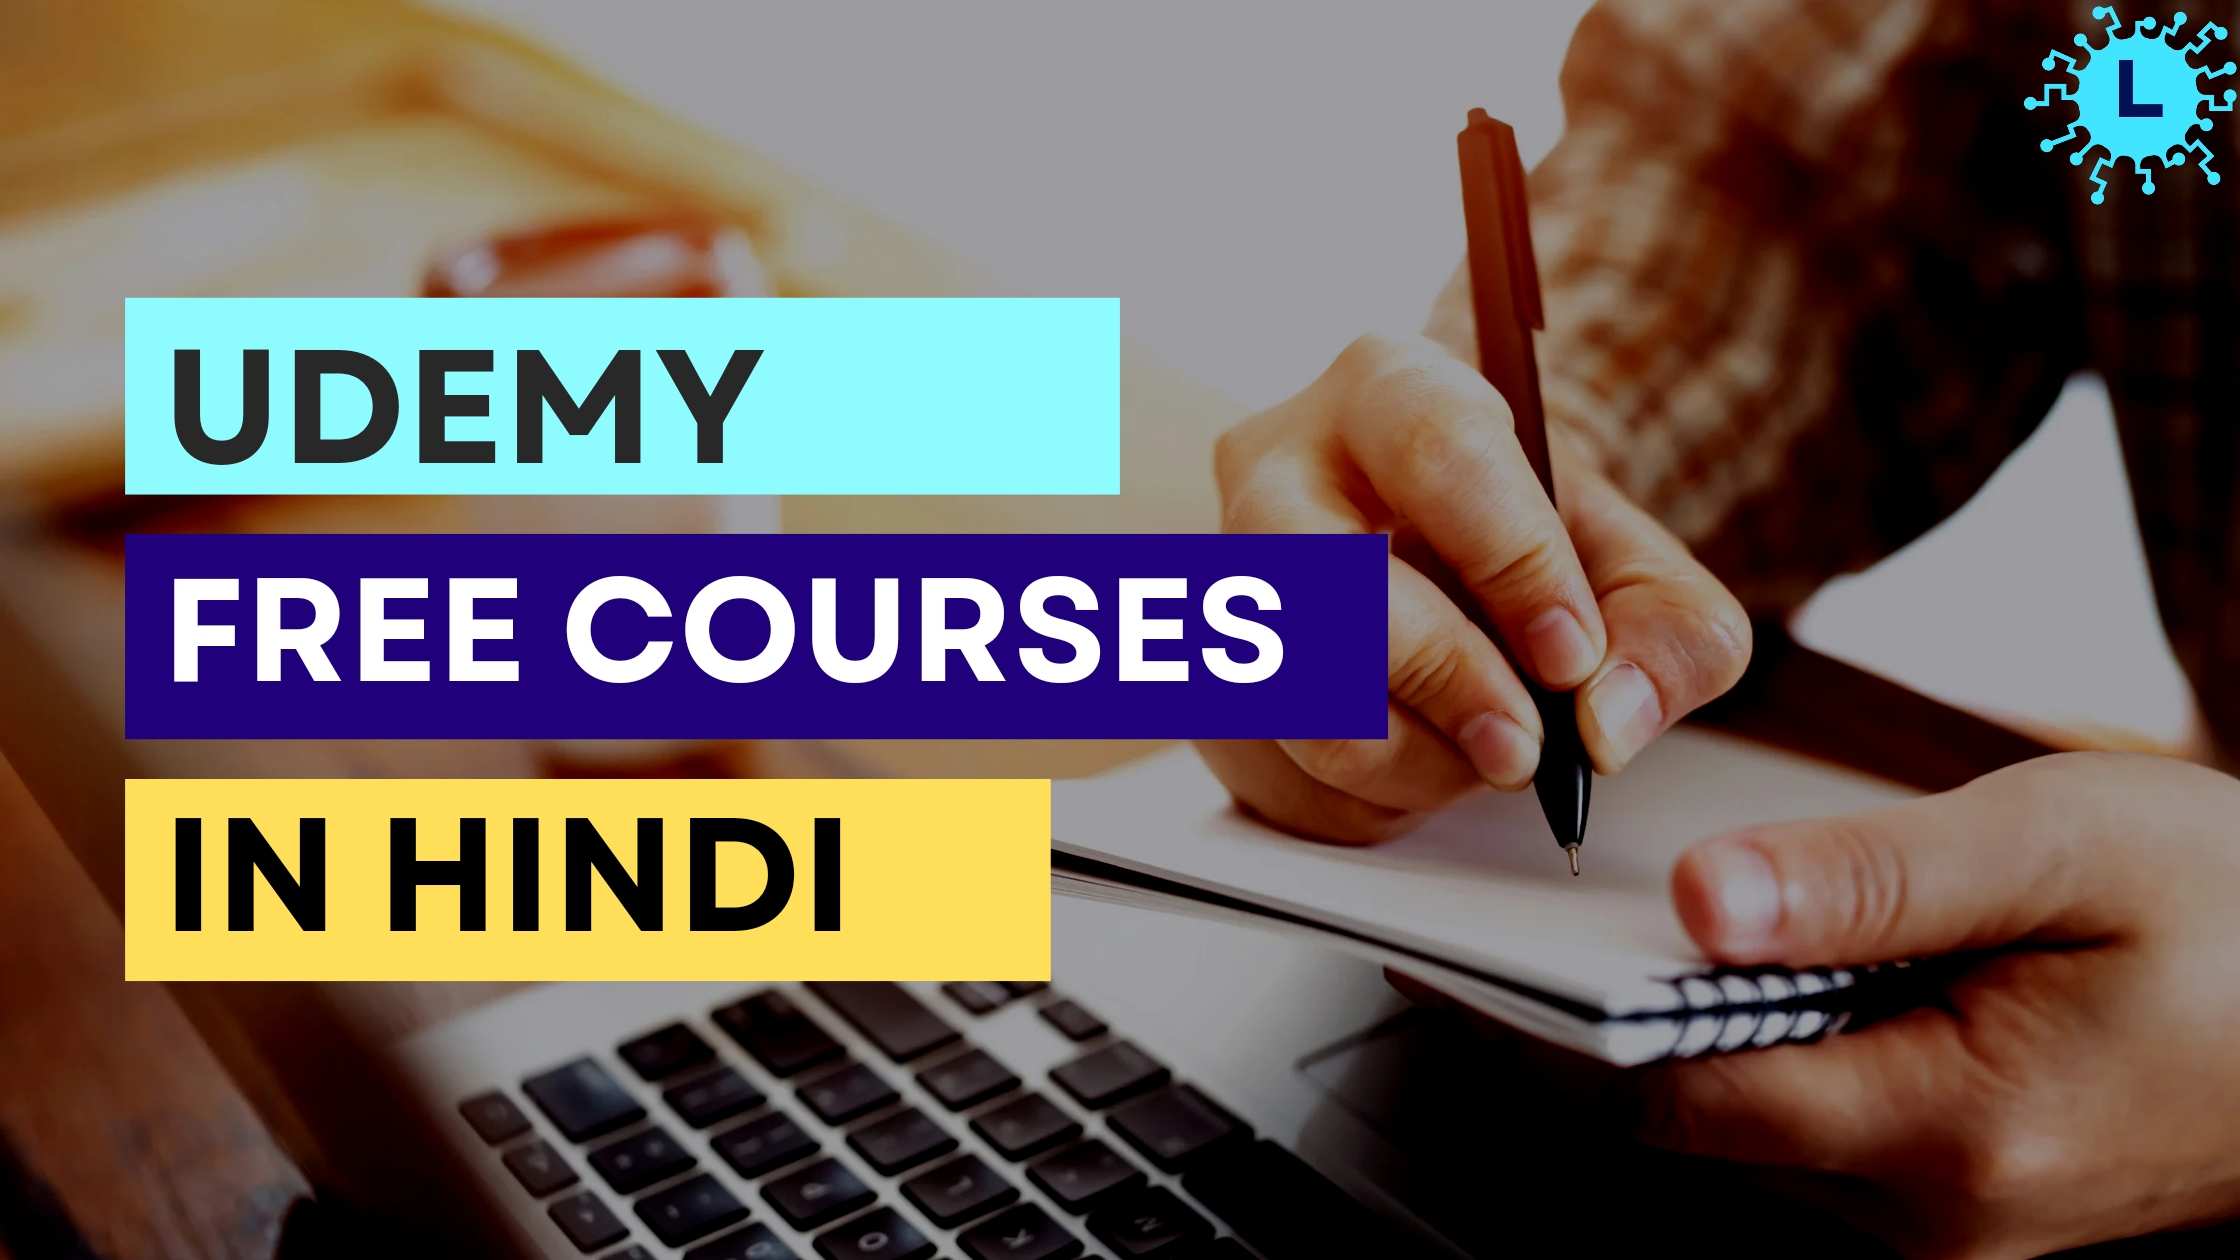 Udemy Free Courses in Hindi